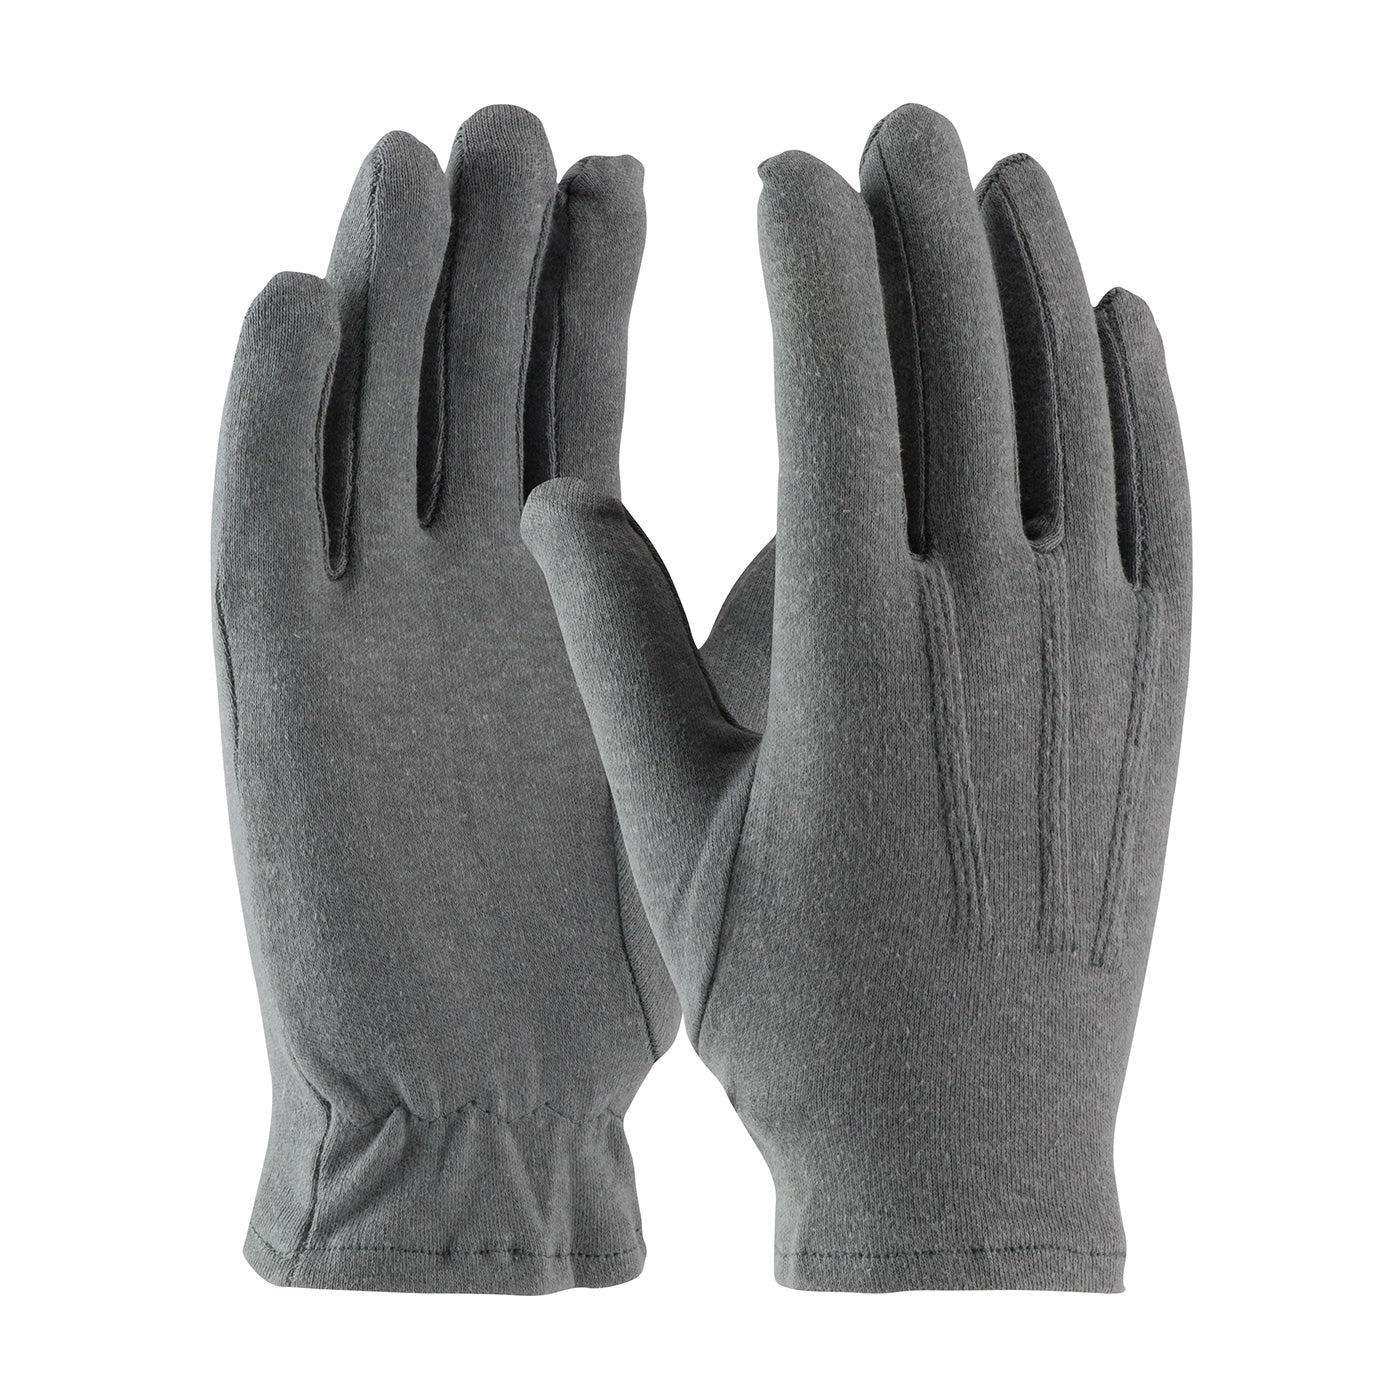 Protective Industrial Products-100% COTTON GRAY DRESS GLOVE-eSafety Supplies, Inc